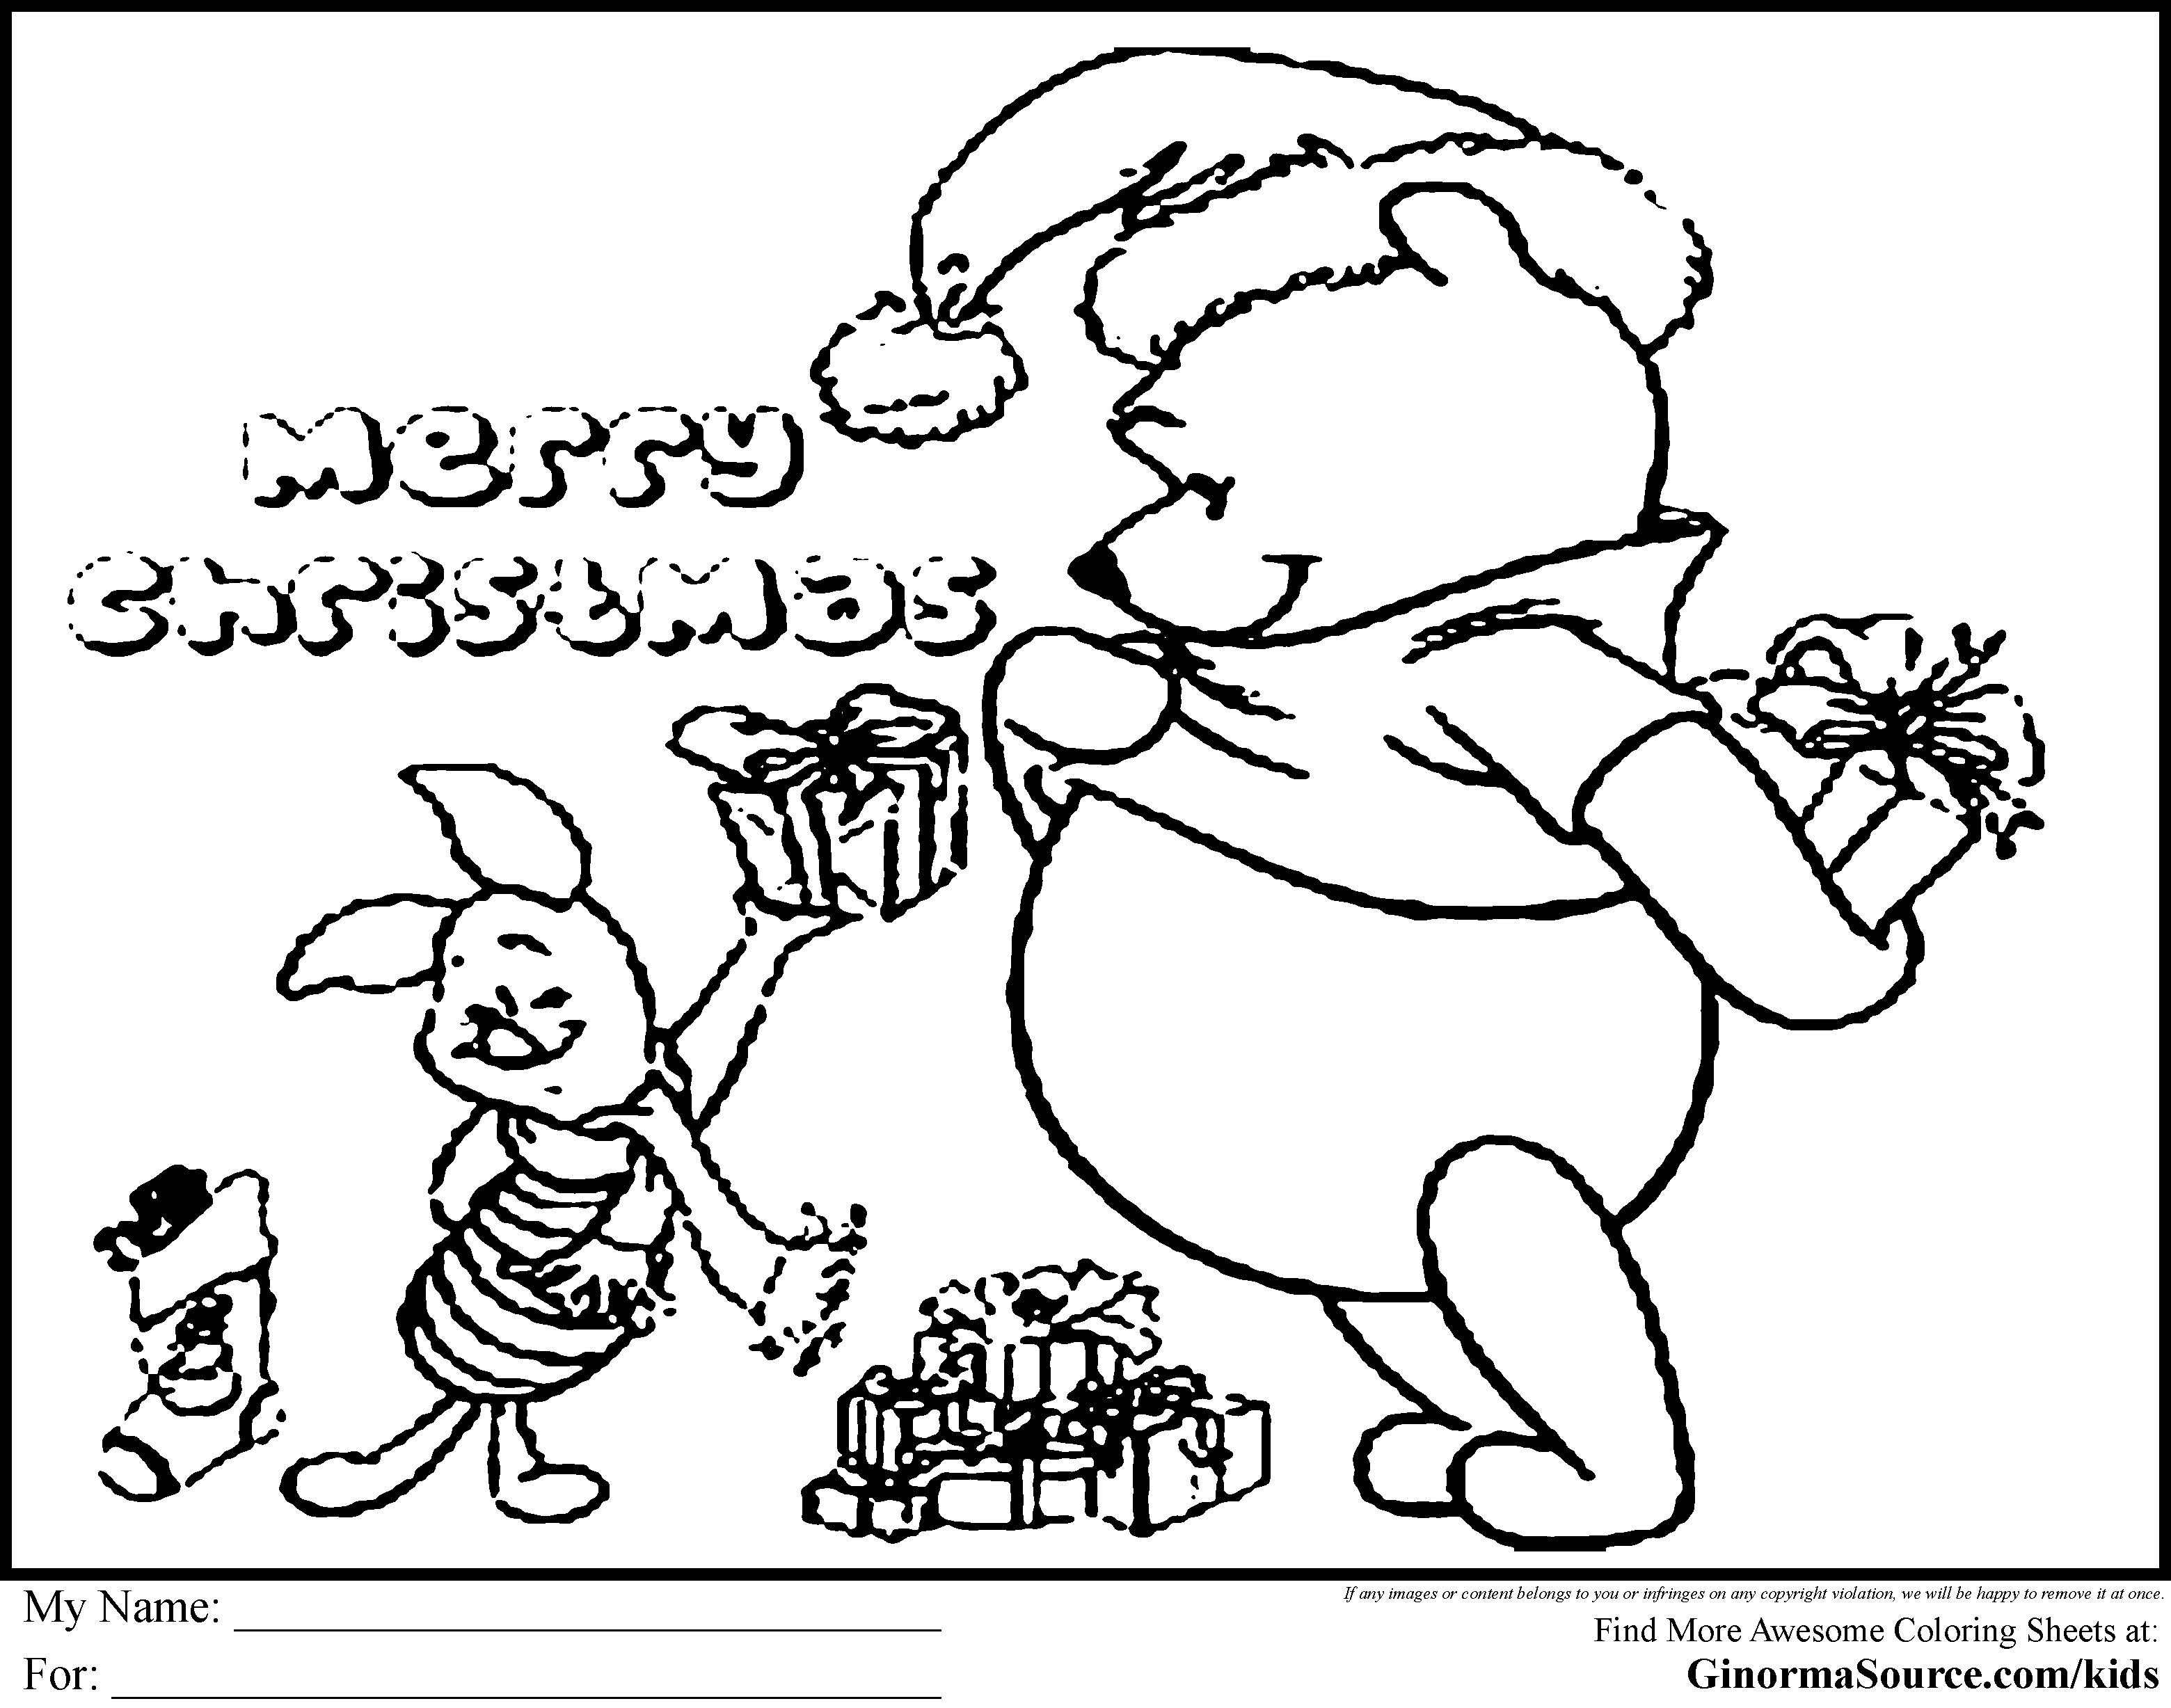 Pooh Bear Coloring Pages (17 Pictures) - Colorine.net | 18646